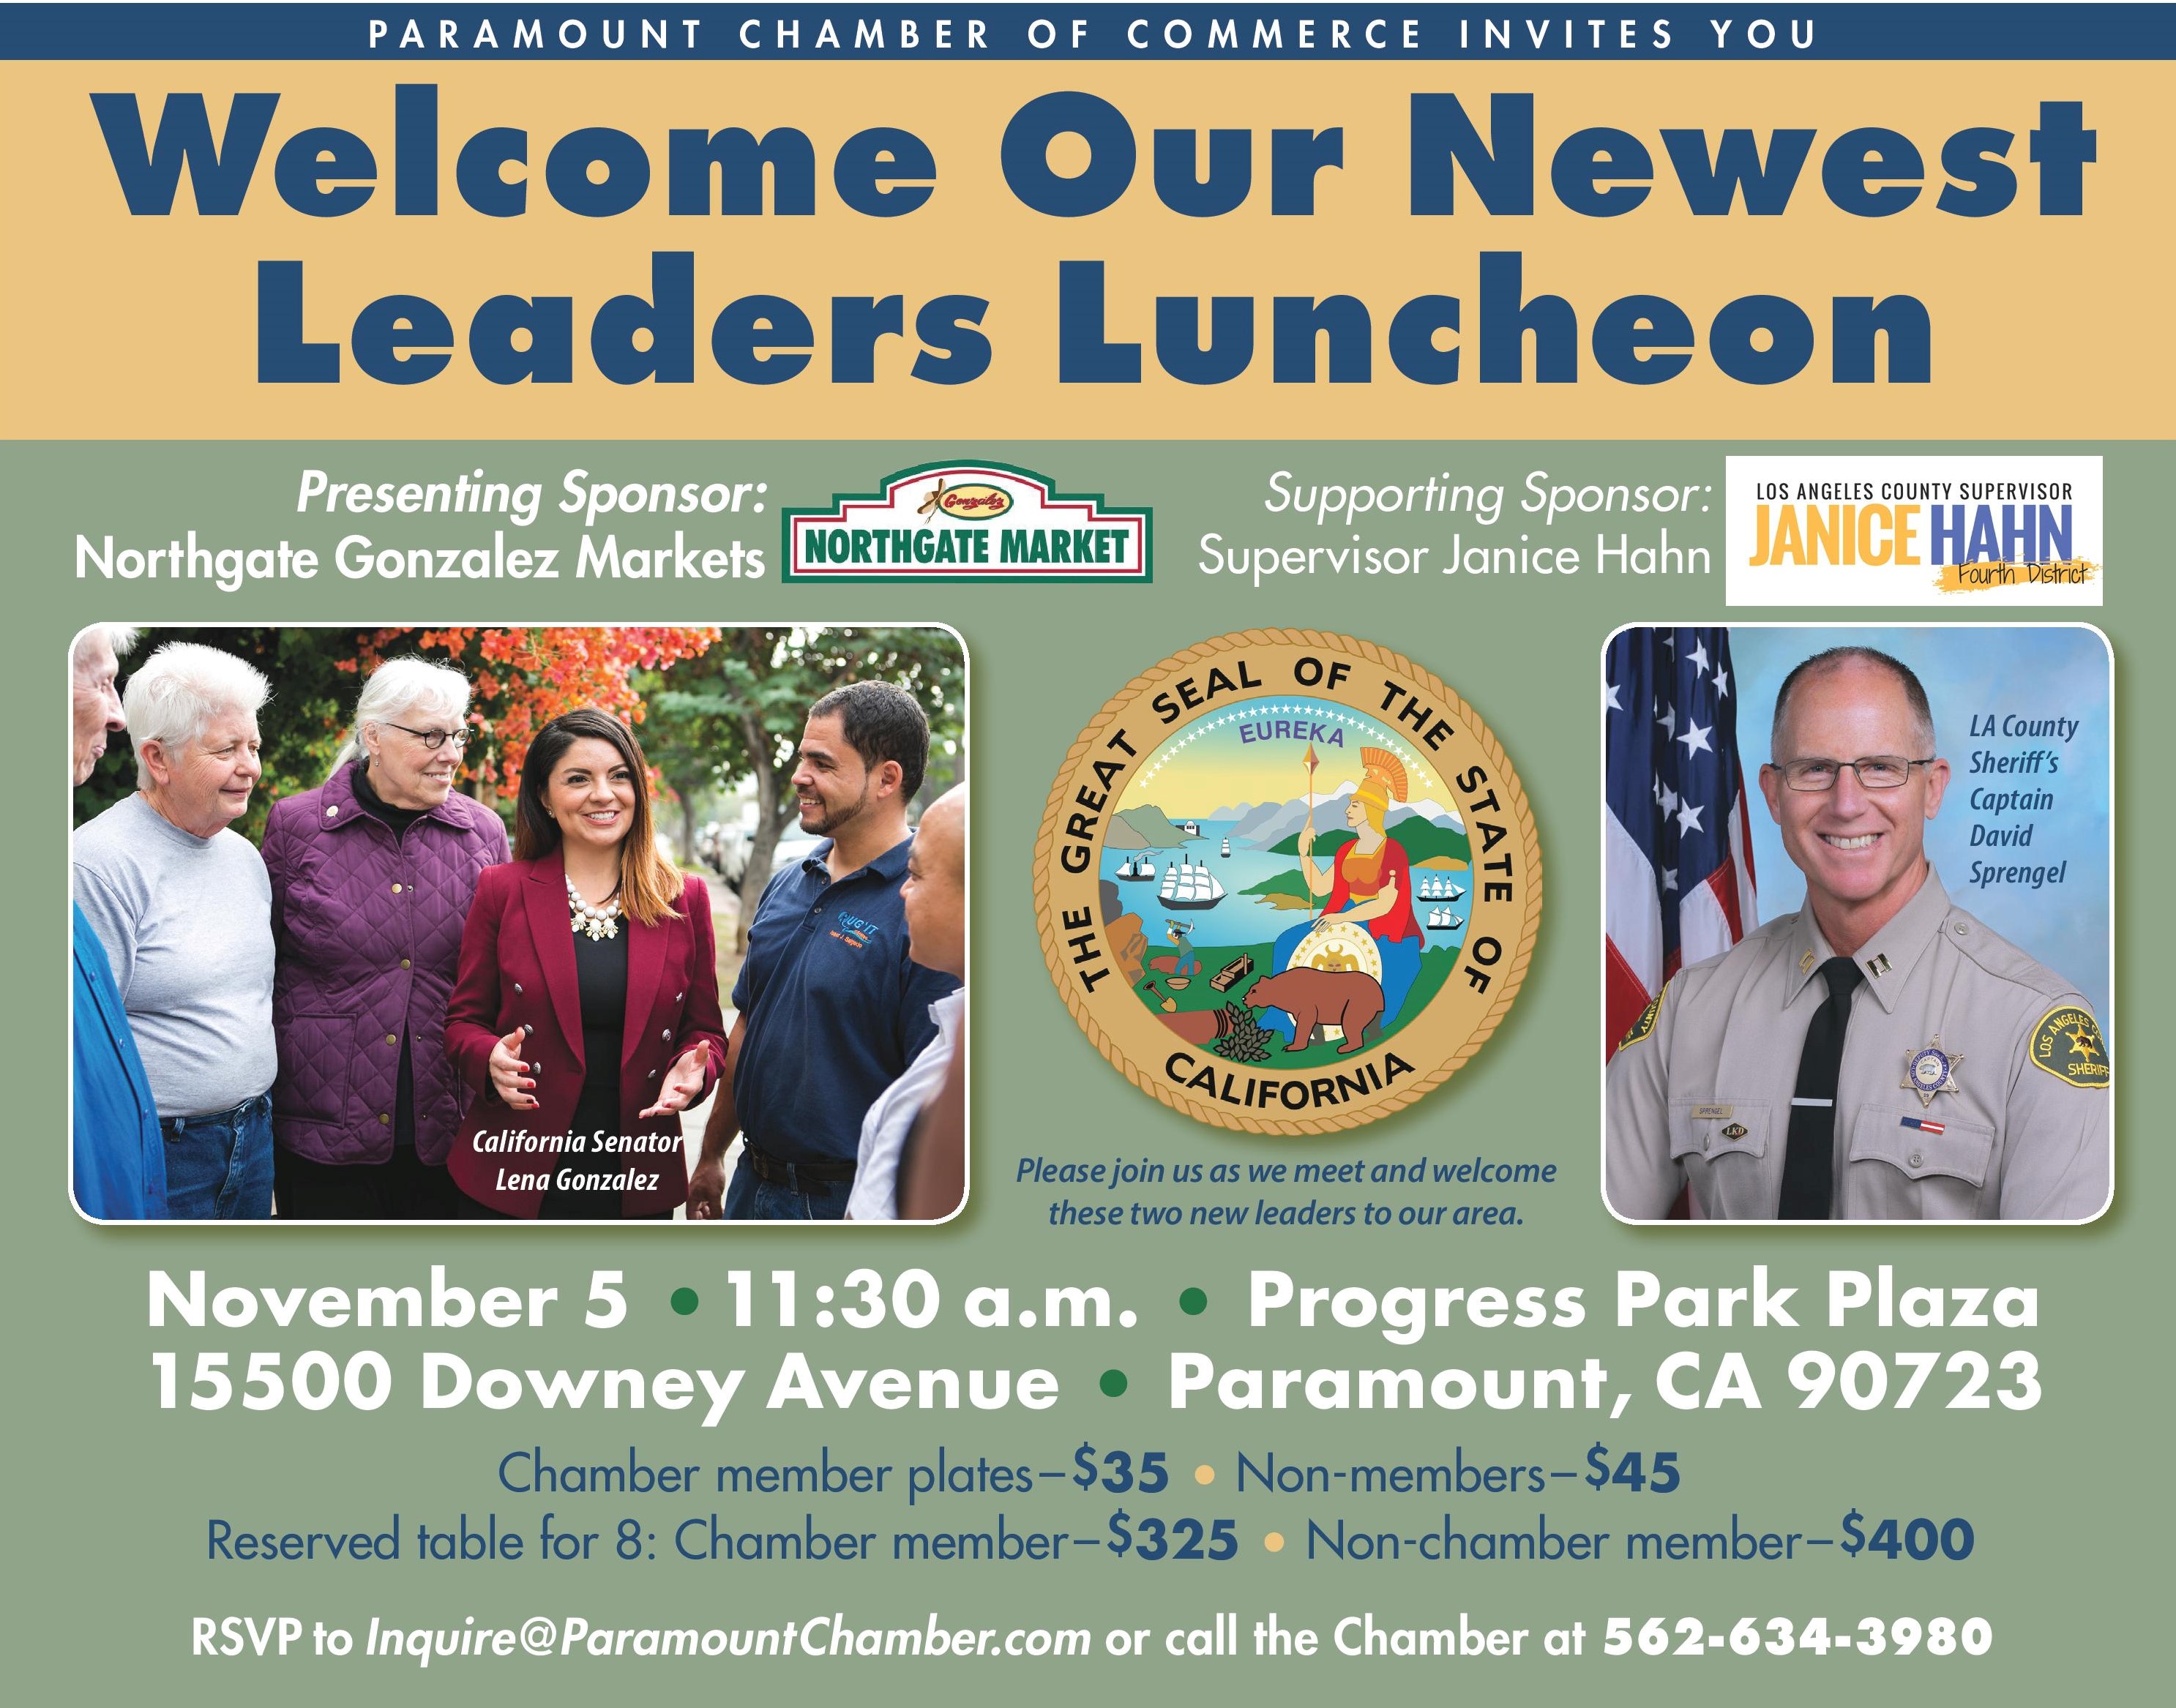 Welcome Our Newest Leaders Luncheon flyer-revised Oct 4-page-001